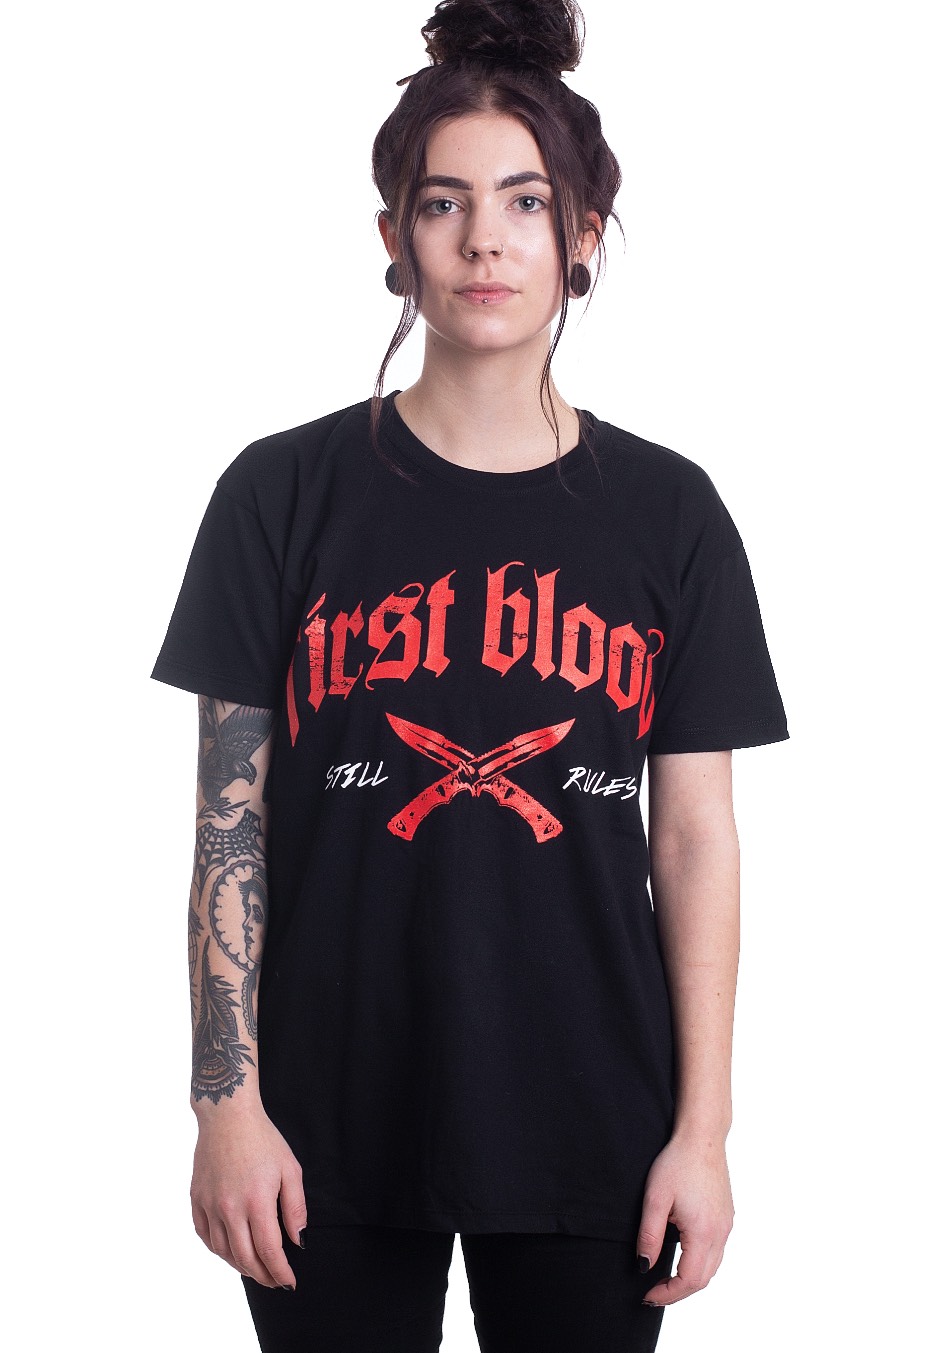 First Blood - So Many Rules - - T-Shirts